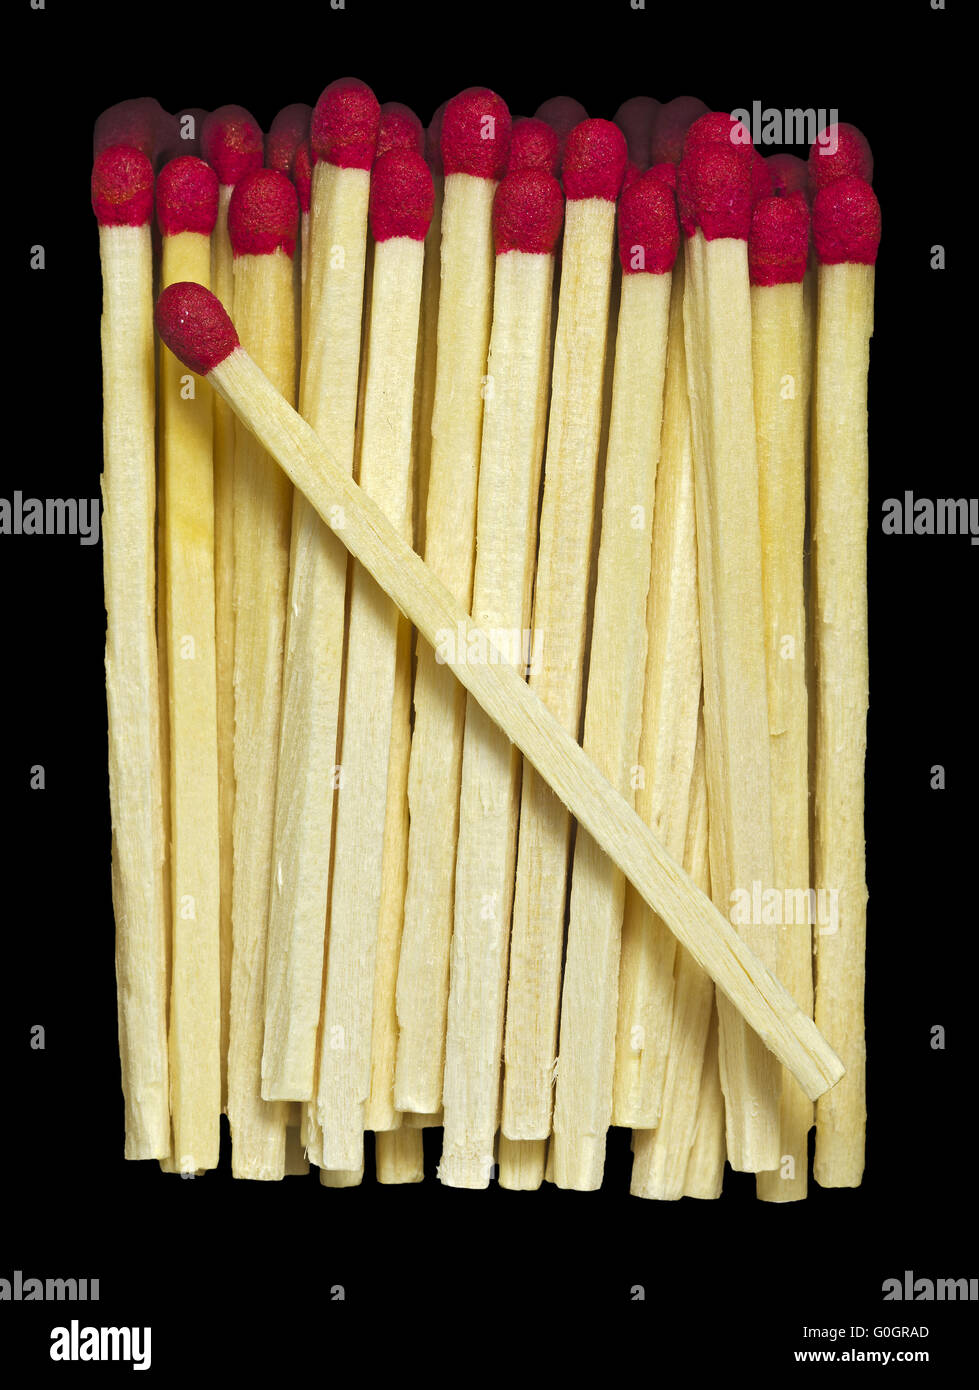 matchsticks with red heads Stock Photo